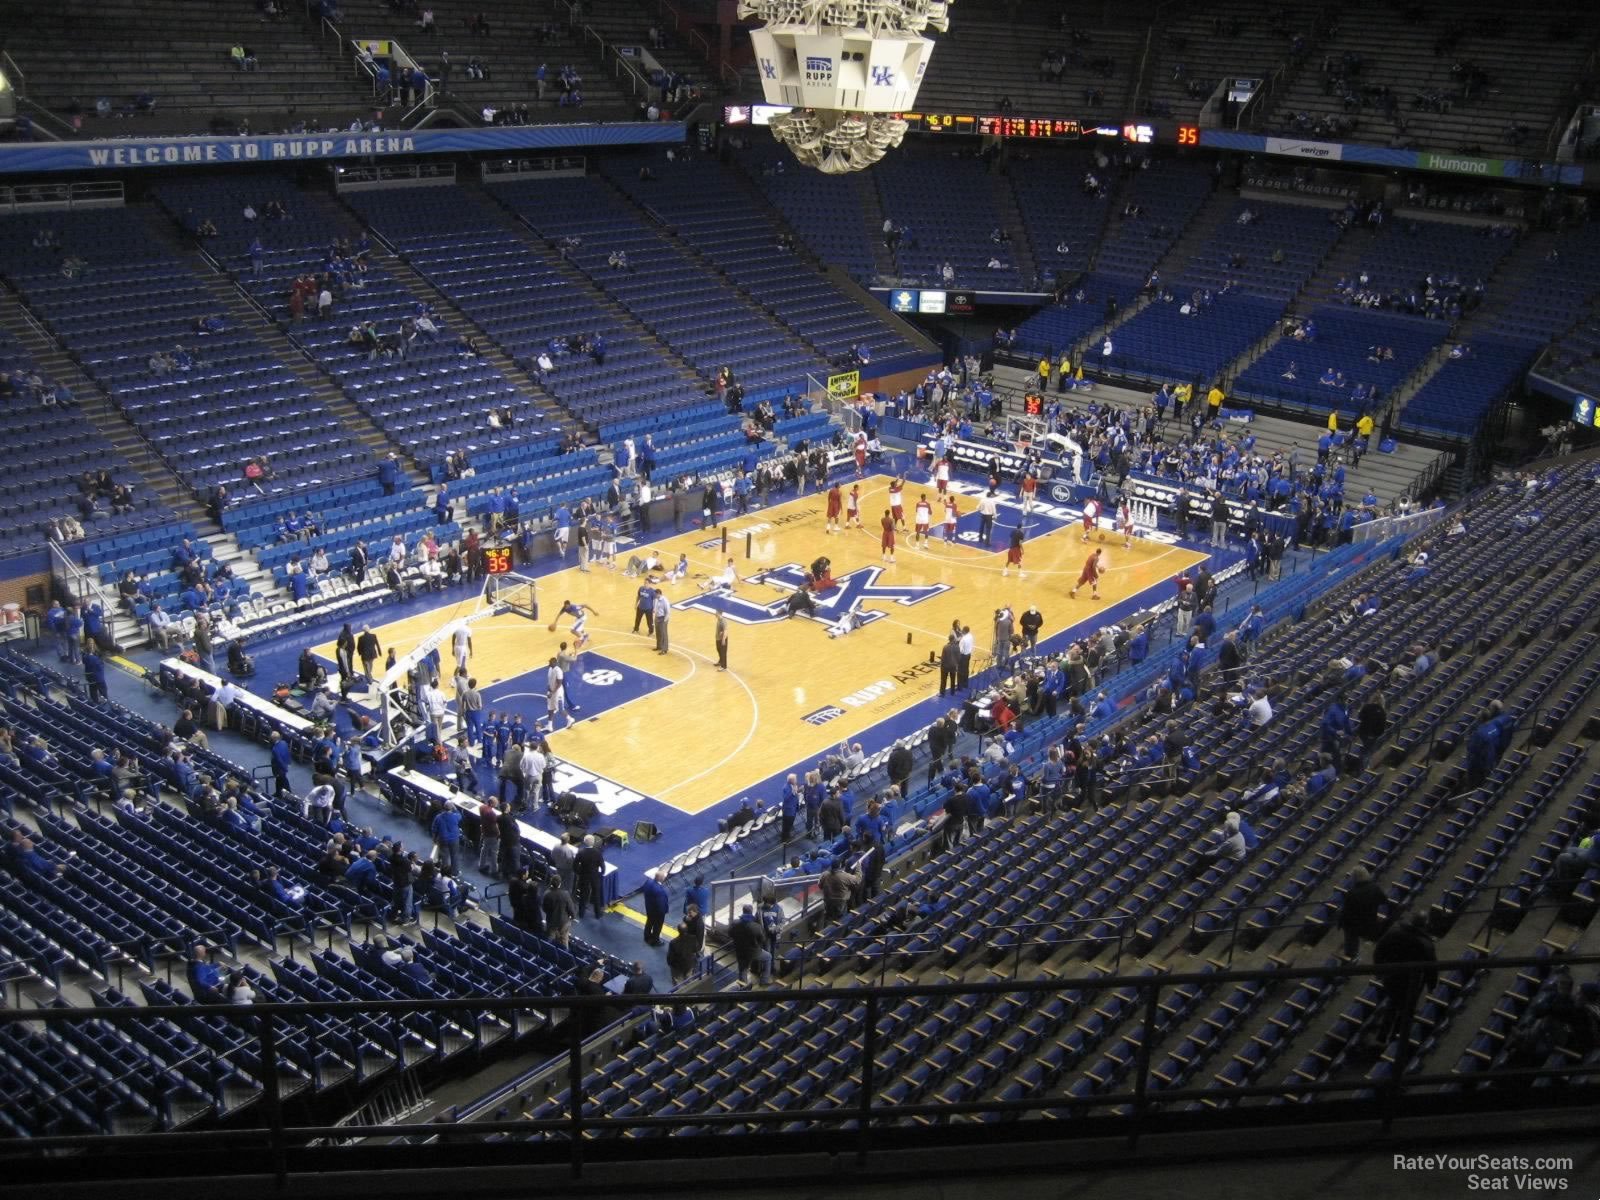 section 218, row h seat view  for basketball - rupp arena